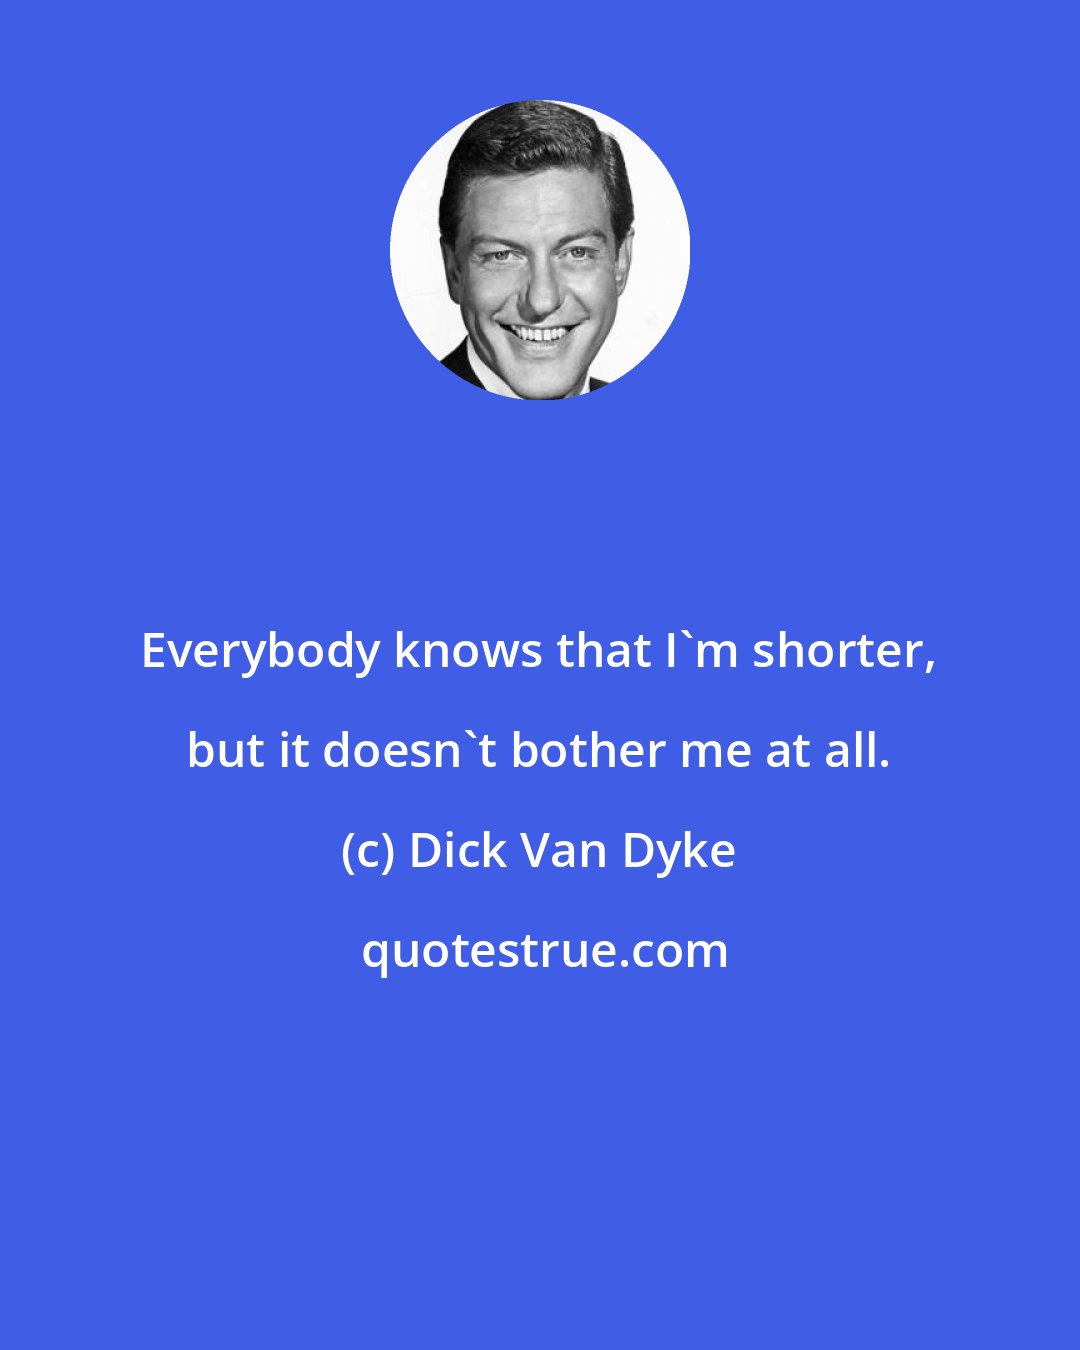 Dick Van Dyke: Everybody knows that I'm shorter, but it doesn't bother me at all.